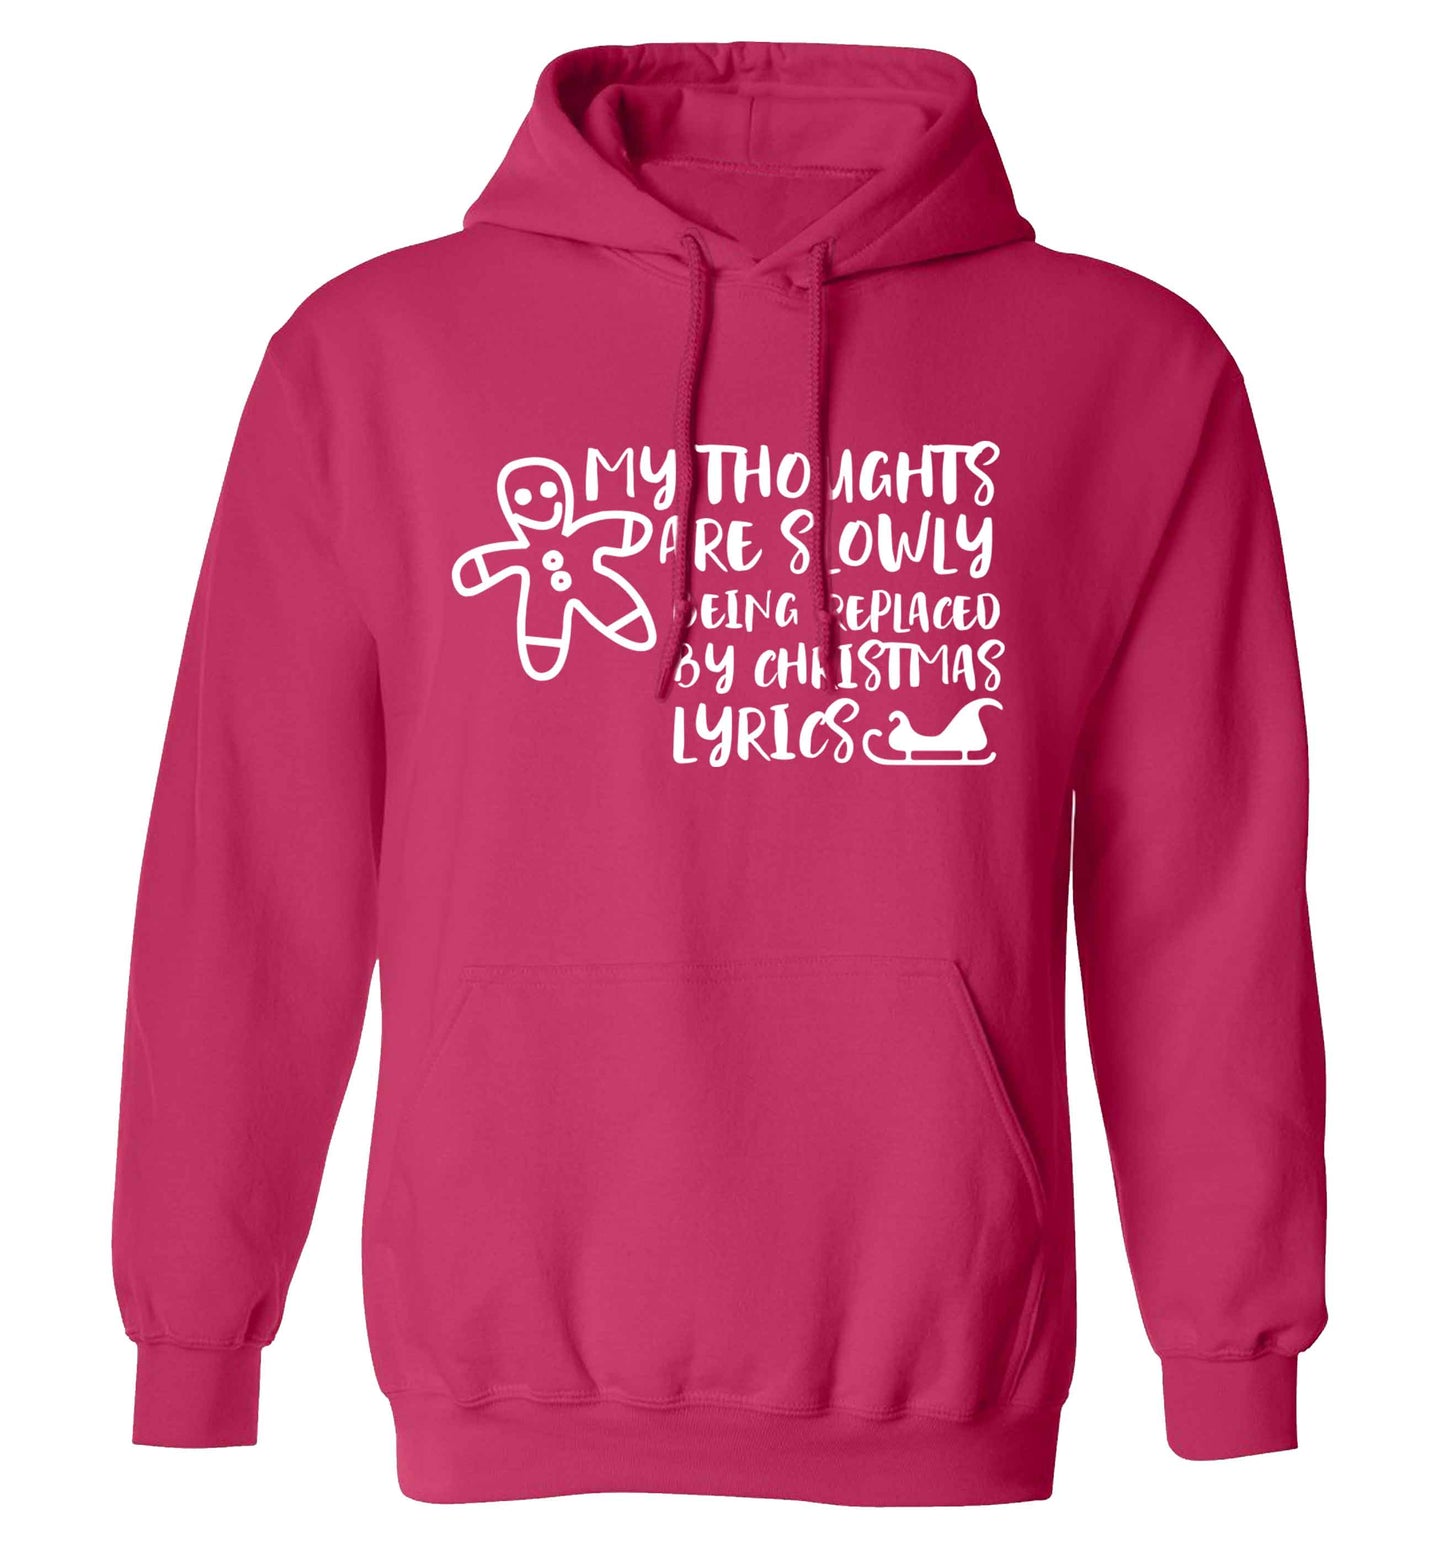 My thoughts are slowly being replaced by Christmas lyrics adults unisex pink hoodie 2XL